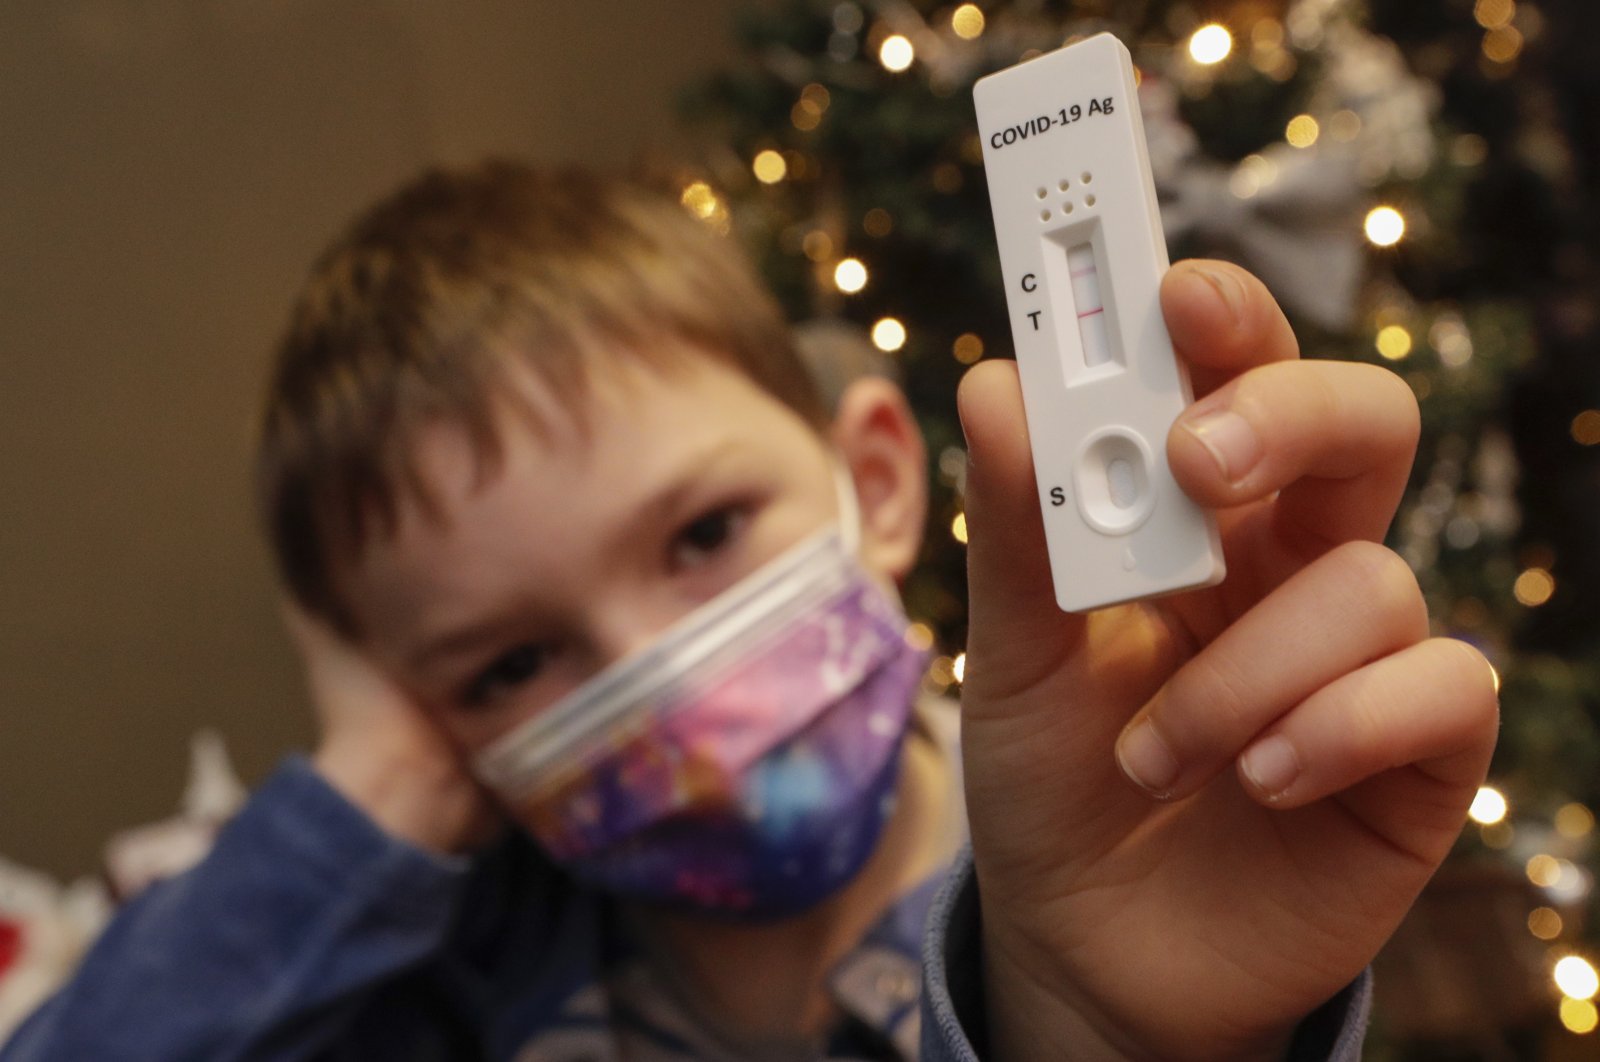 A child poses with a positive rapid COVID-19 antigen test next to a Christmas tree in Namur, Belgium, Dec. 24, 2021. (EPA Photo)